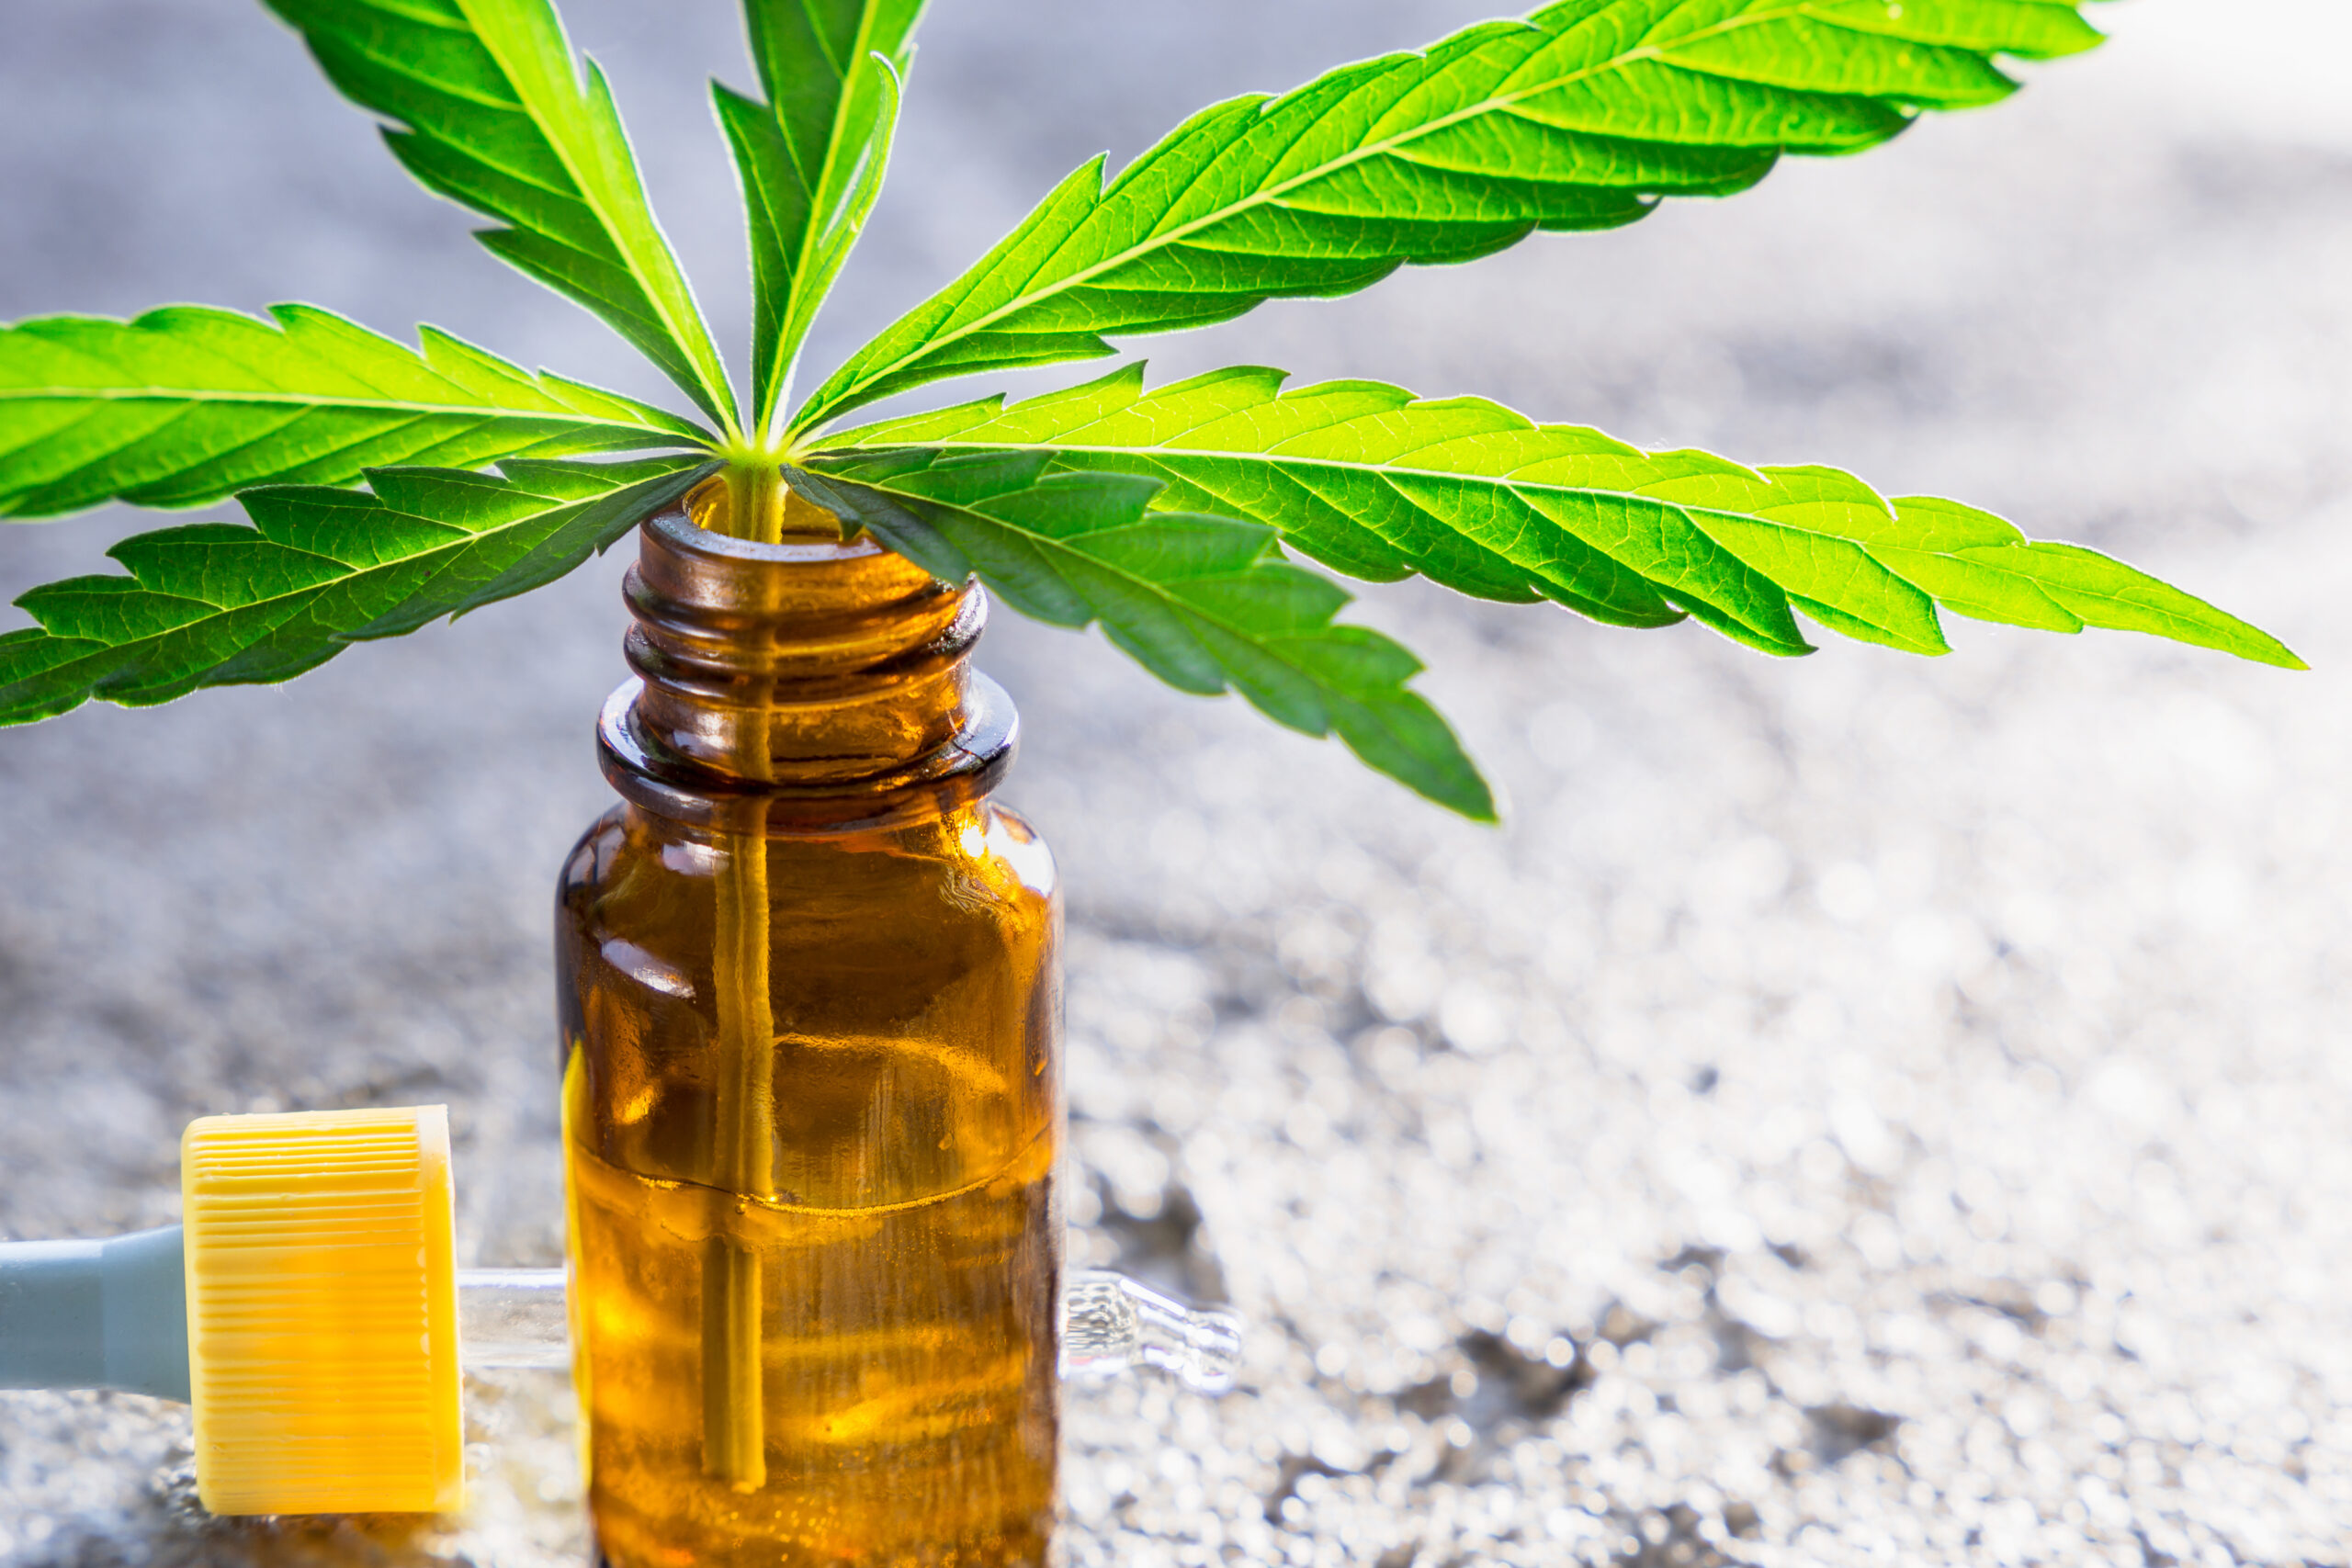 How to Make a Cannabis Tincture